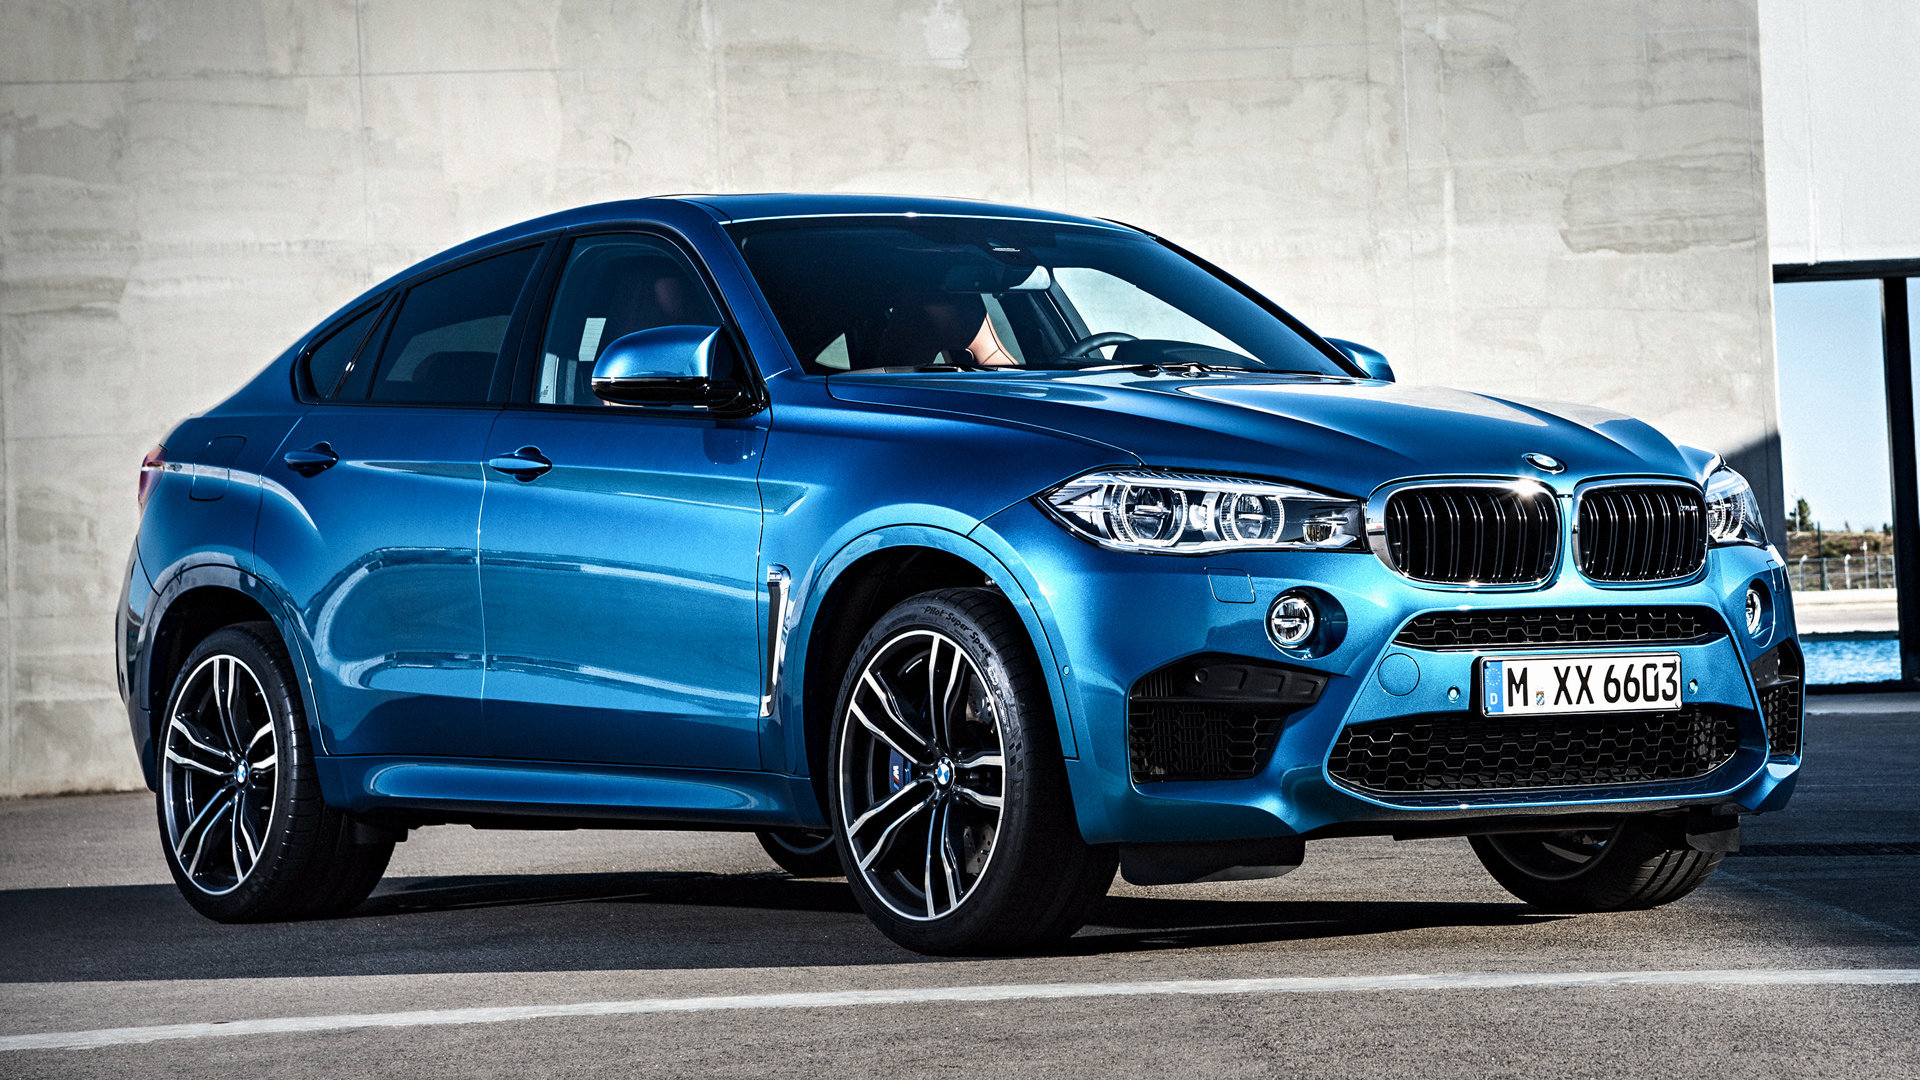 BMW X6 M (2015) Wallpapers and HD Images - Car Pixel